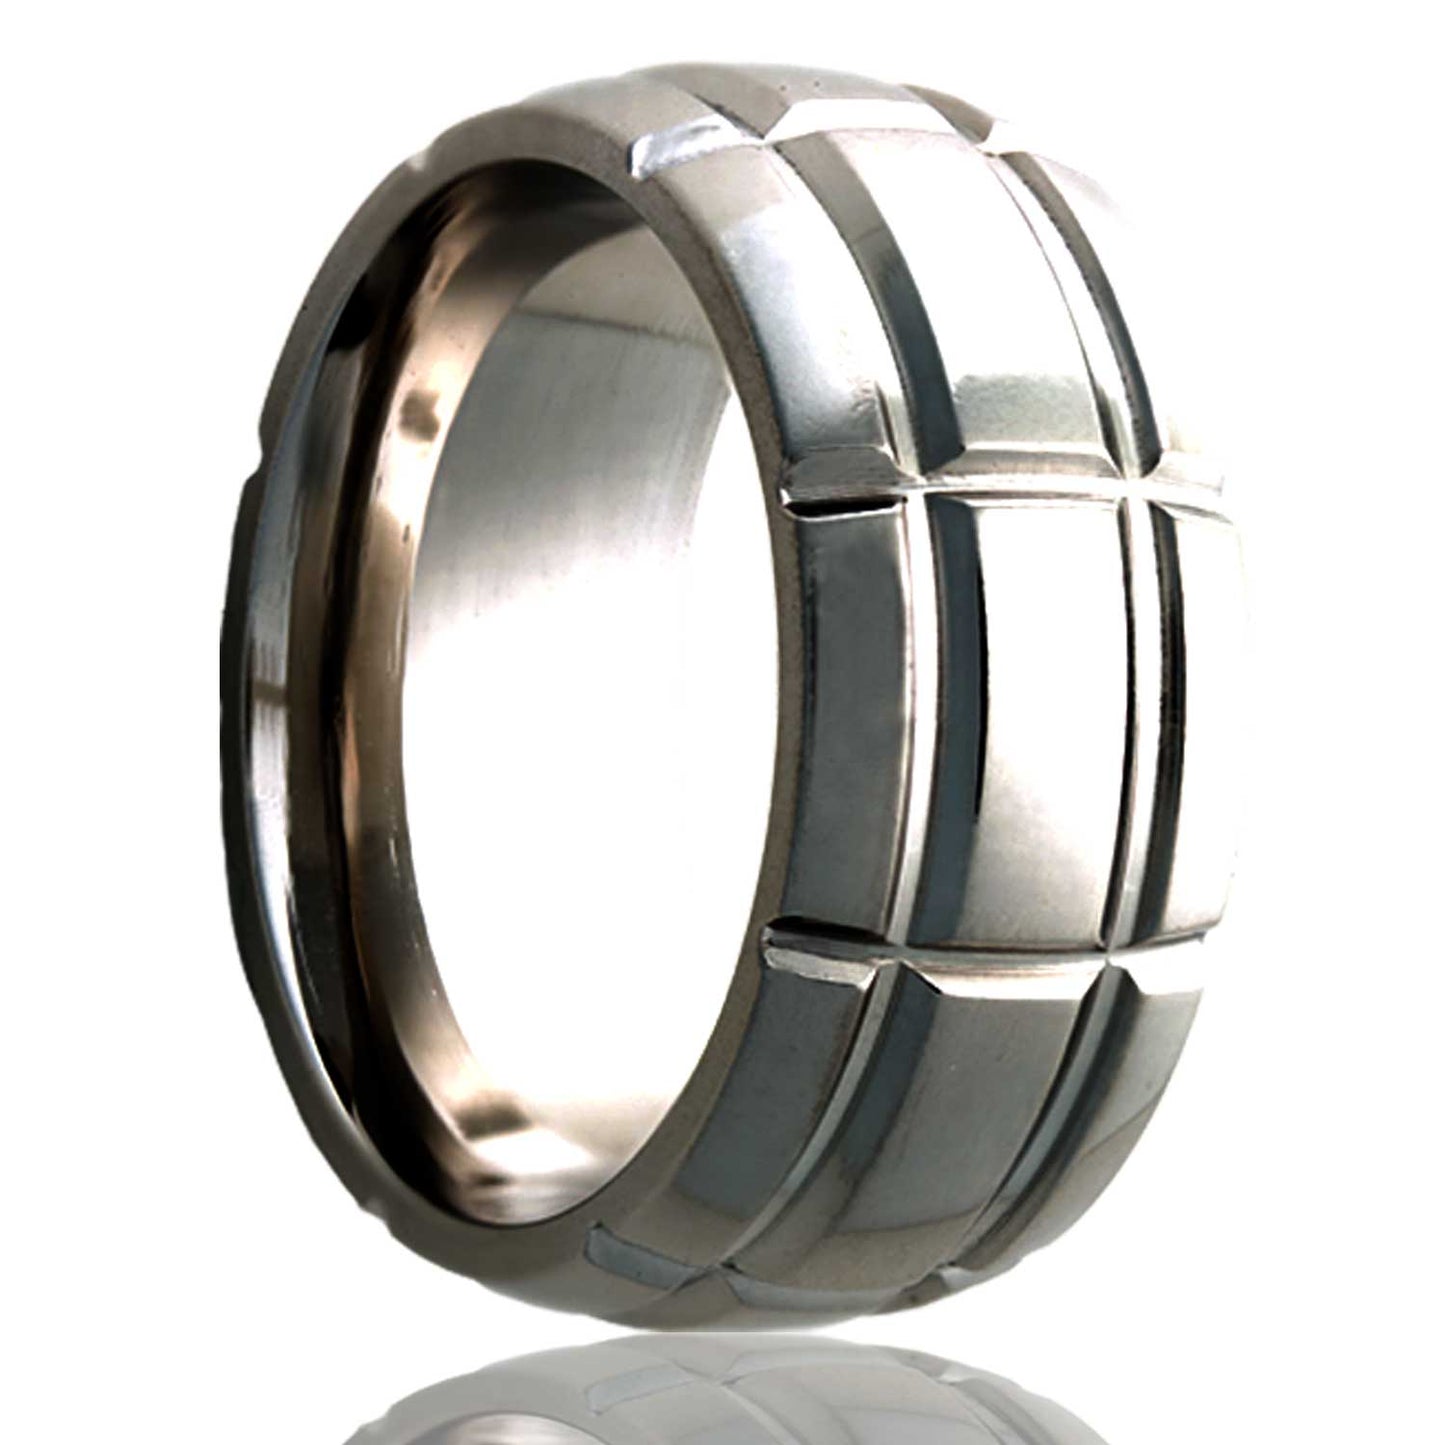 A intersecting groove pattern domed cobalt wedding band displayed on a neutral white background.